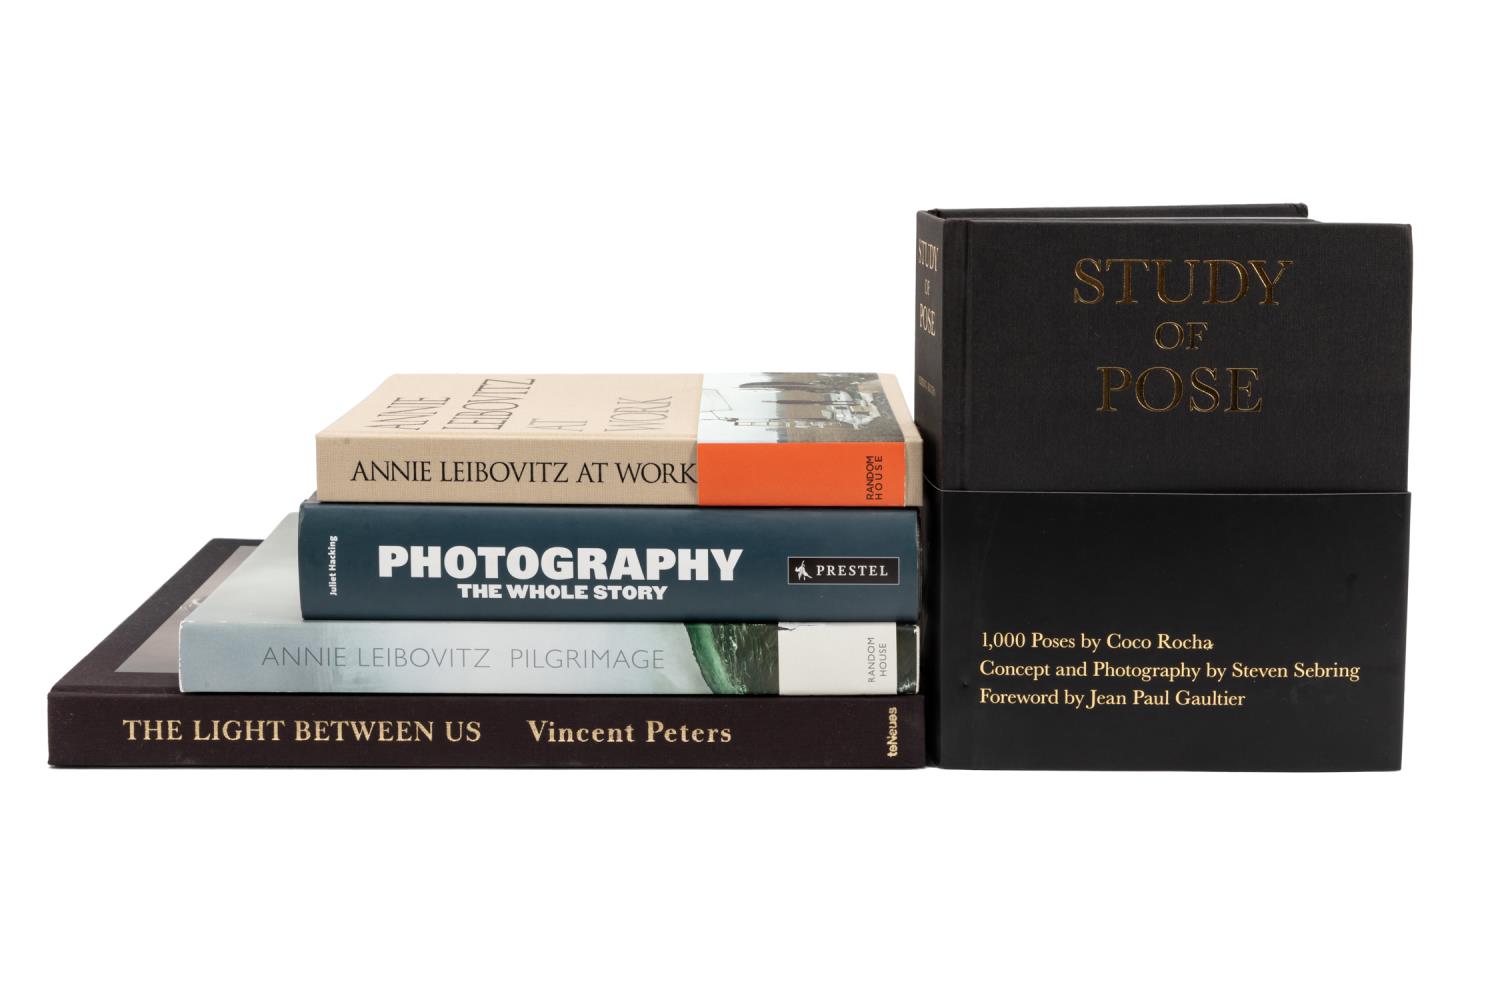 FIVE HARDCOVER BOOKS ON ART PHOTOGRAPHY 29f717